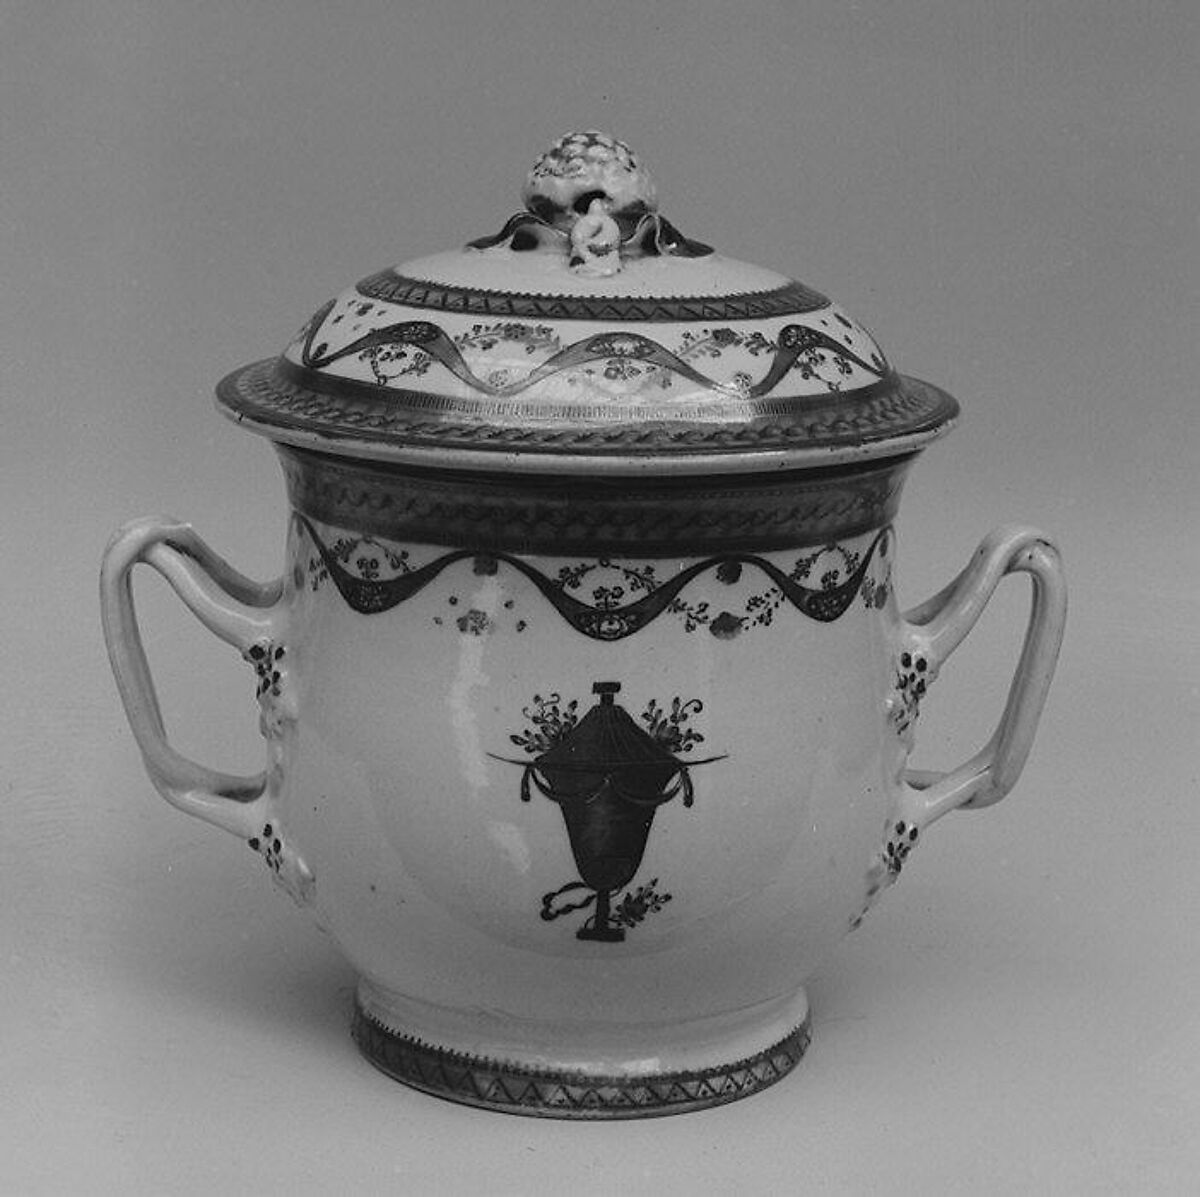 Sugar bowl with cover, Hard-paste porcelain, Chinese, probably for American market 